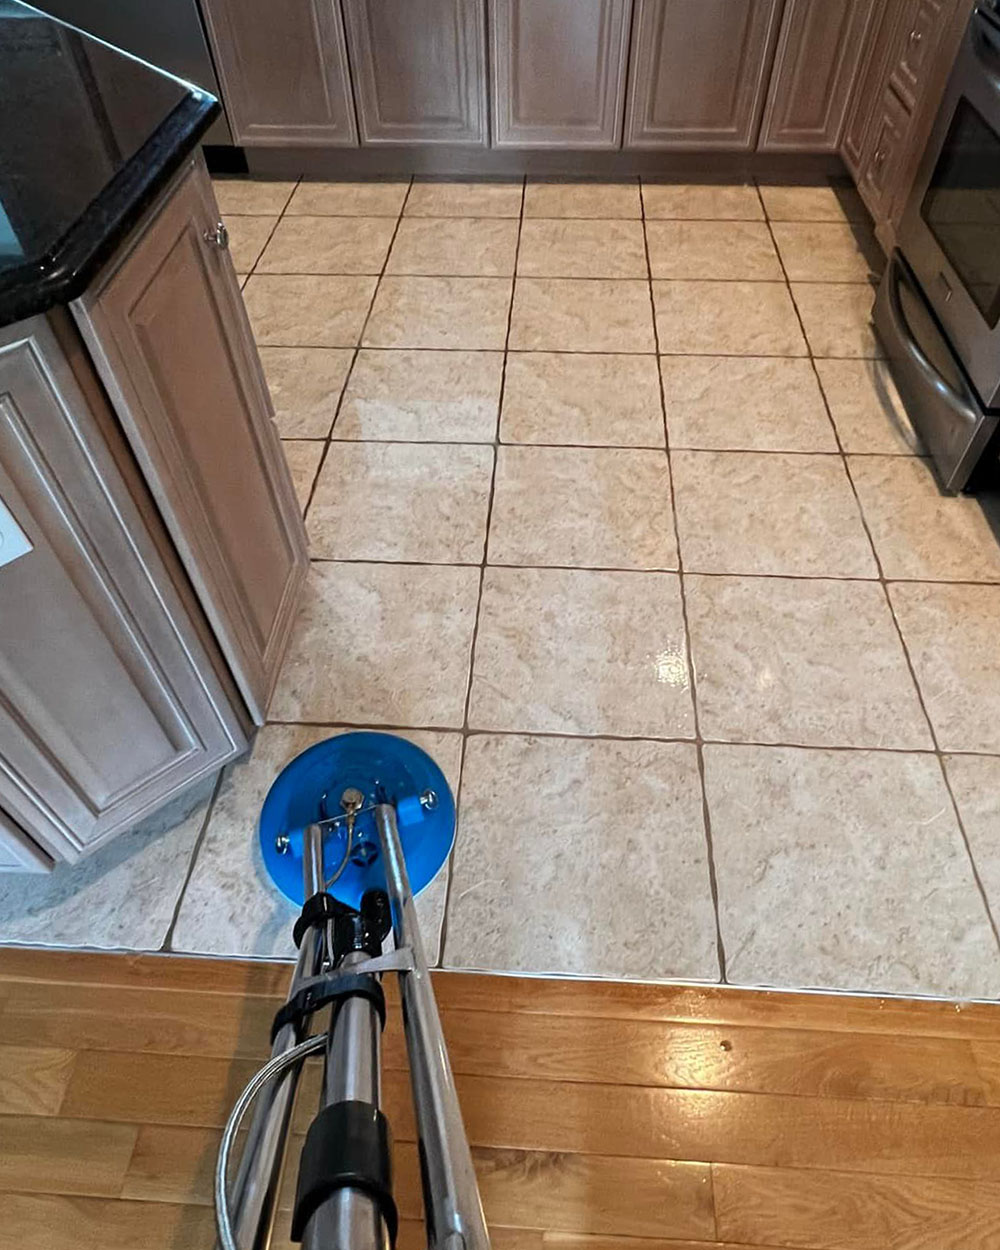 Clean Tile from AO Cleaning Tile & Grout Cleaning Services